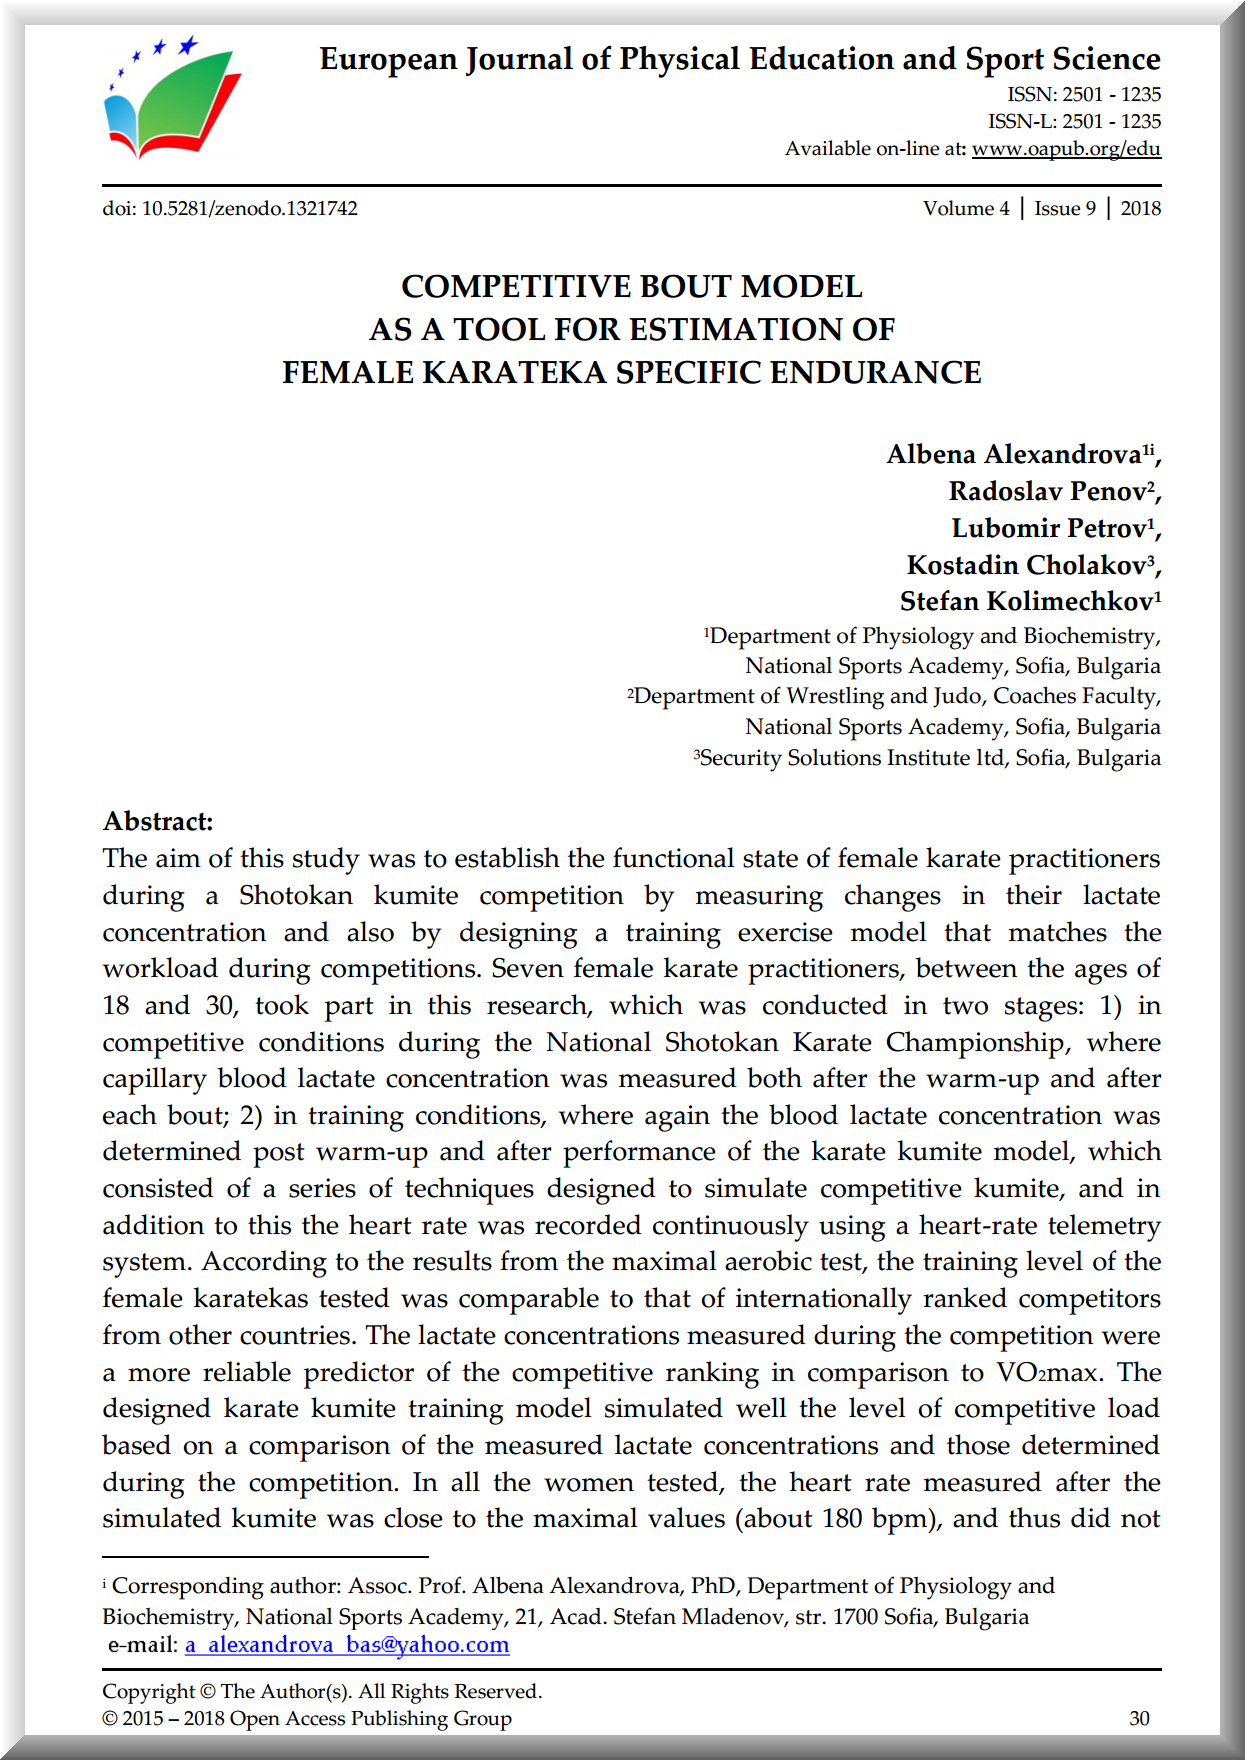 Competitive bout model as a tool for estimation of female karateka specific endurance (2018)